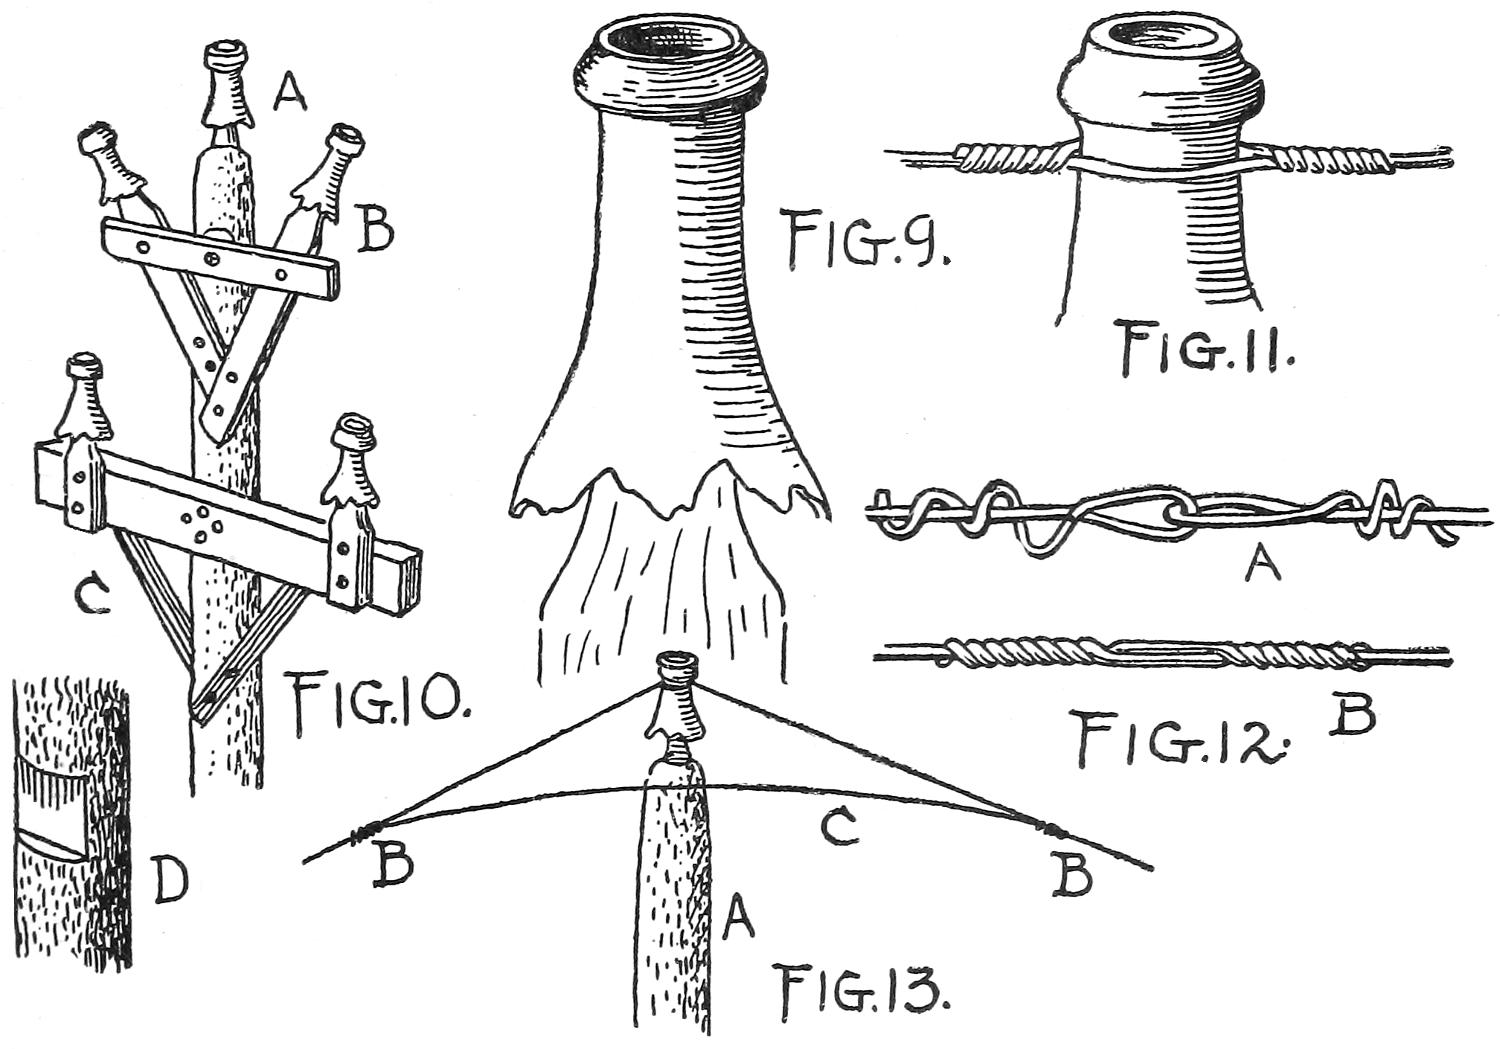 Insulators and connections